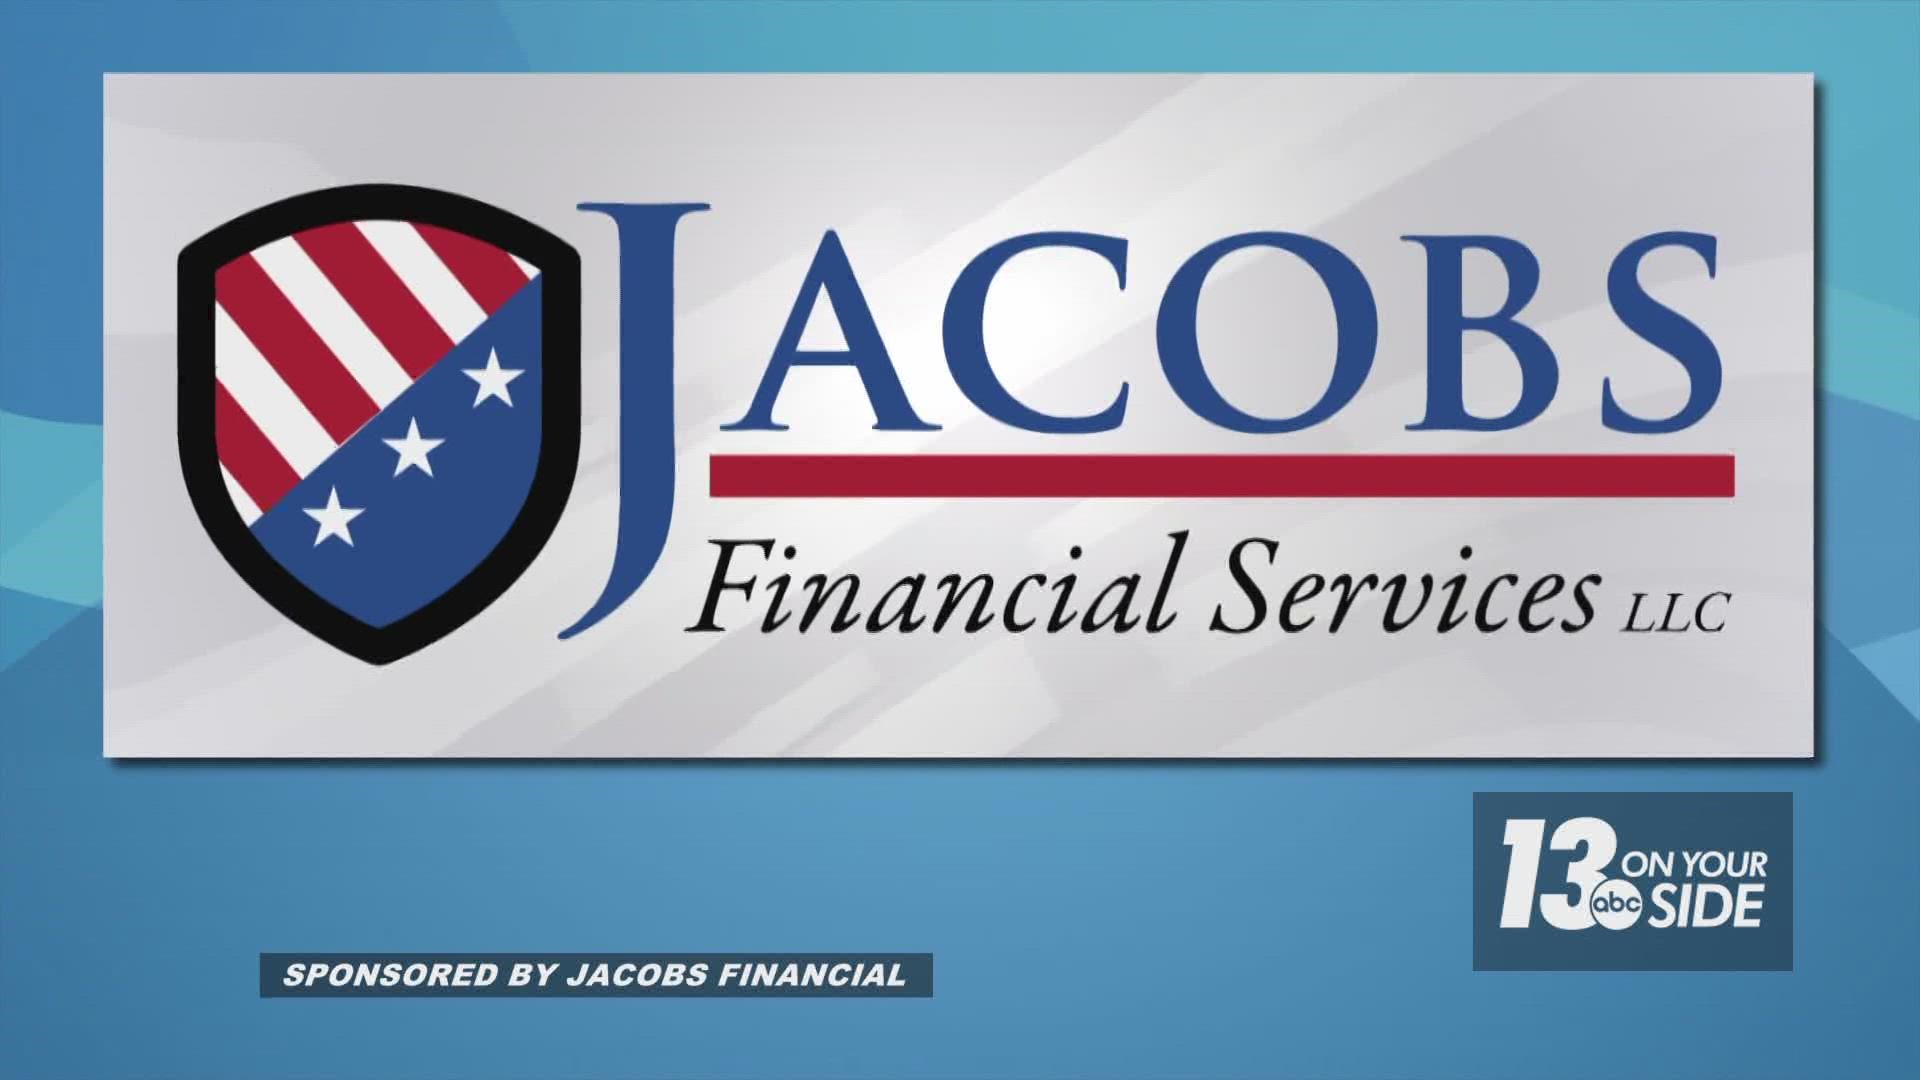 Tom Jacobs joined us from Jacobs Financial Services to tell us how to invest for retirement.